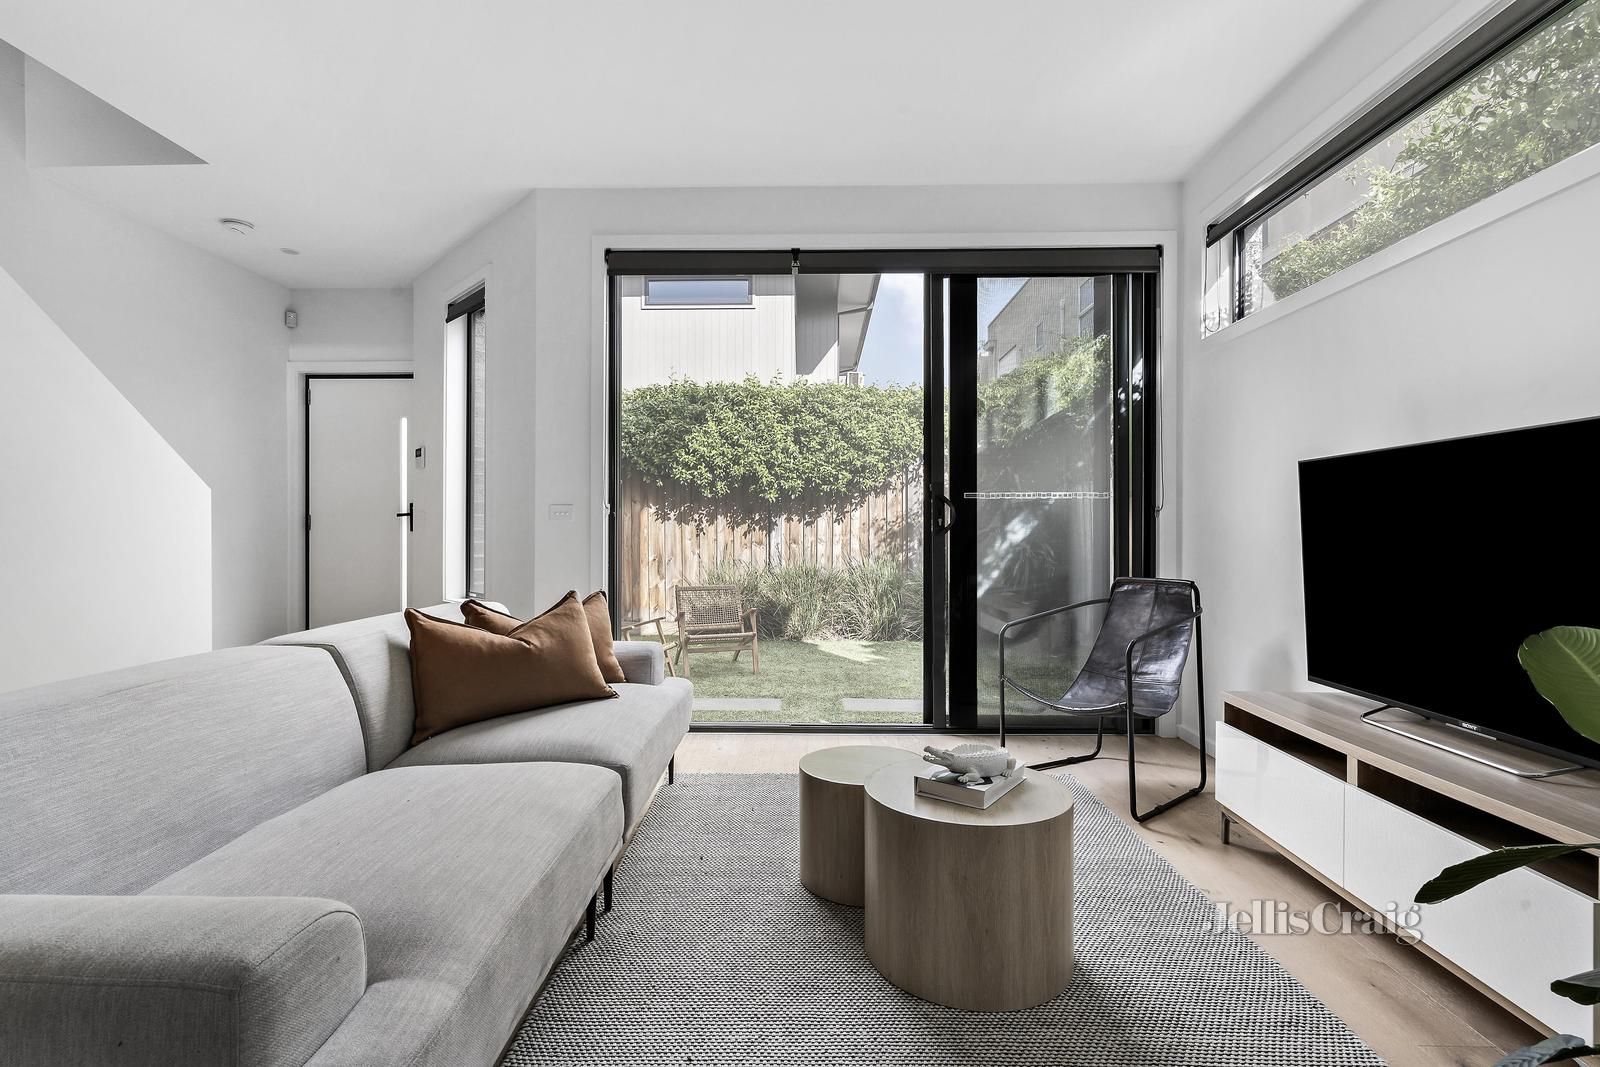 2 bedrooms Townhouse in 3/22 Orford Street MOONEE PONDS VIC, 3039